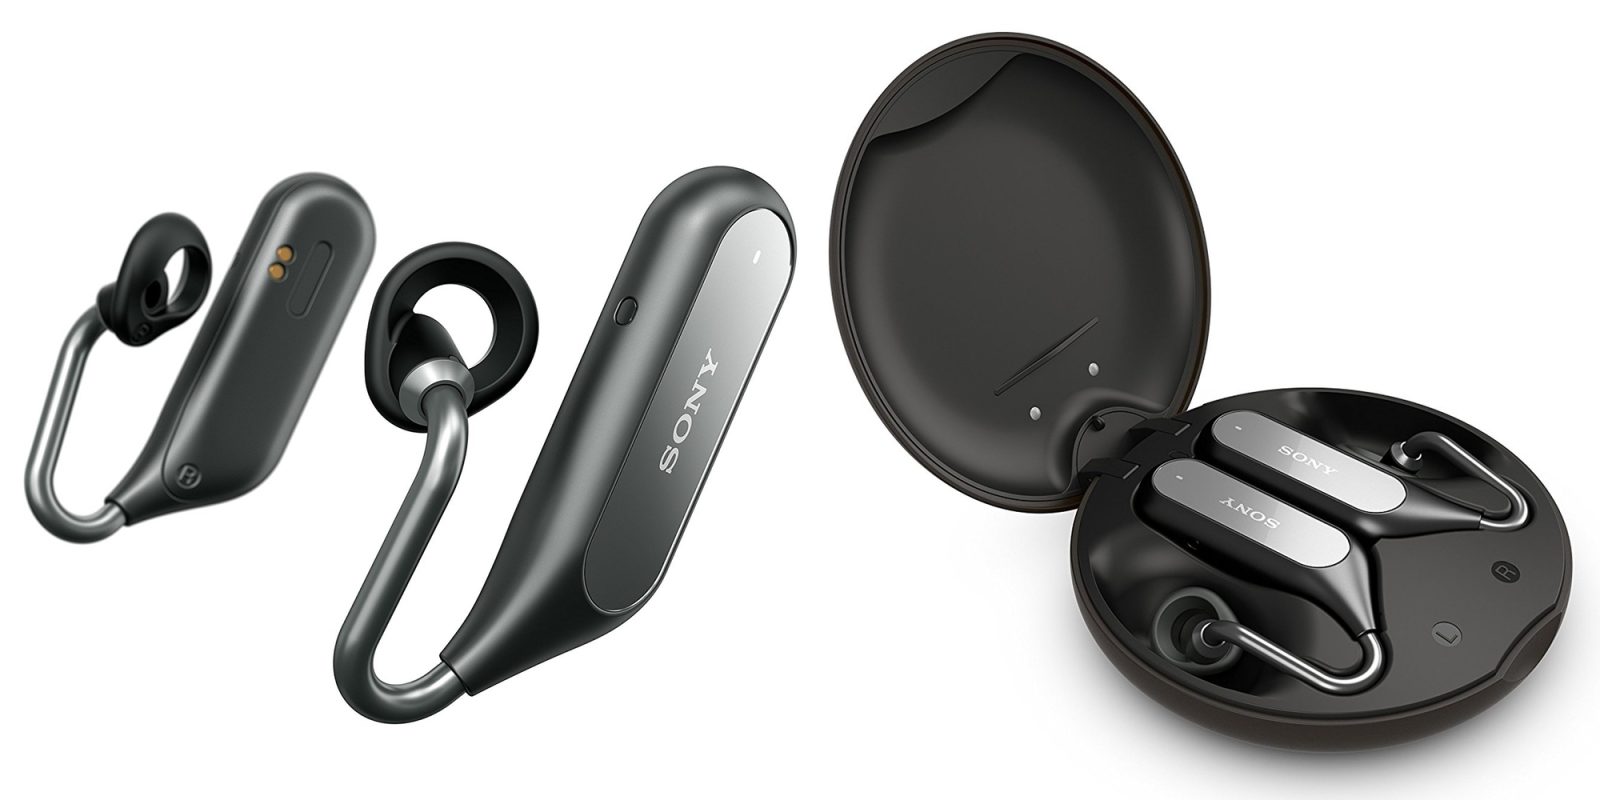 Sony Xperia Ear Duo True Wireless Earbuds get first major price drop to